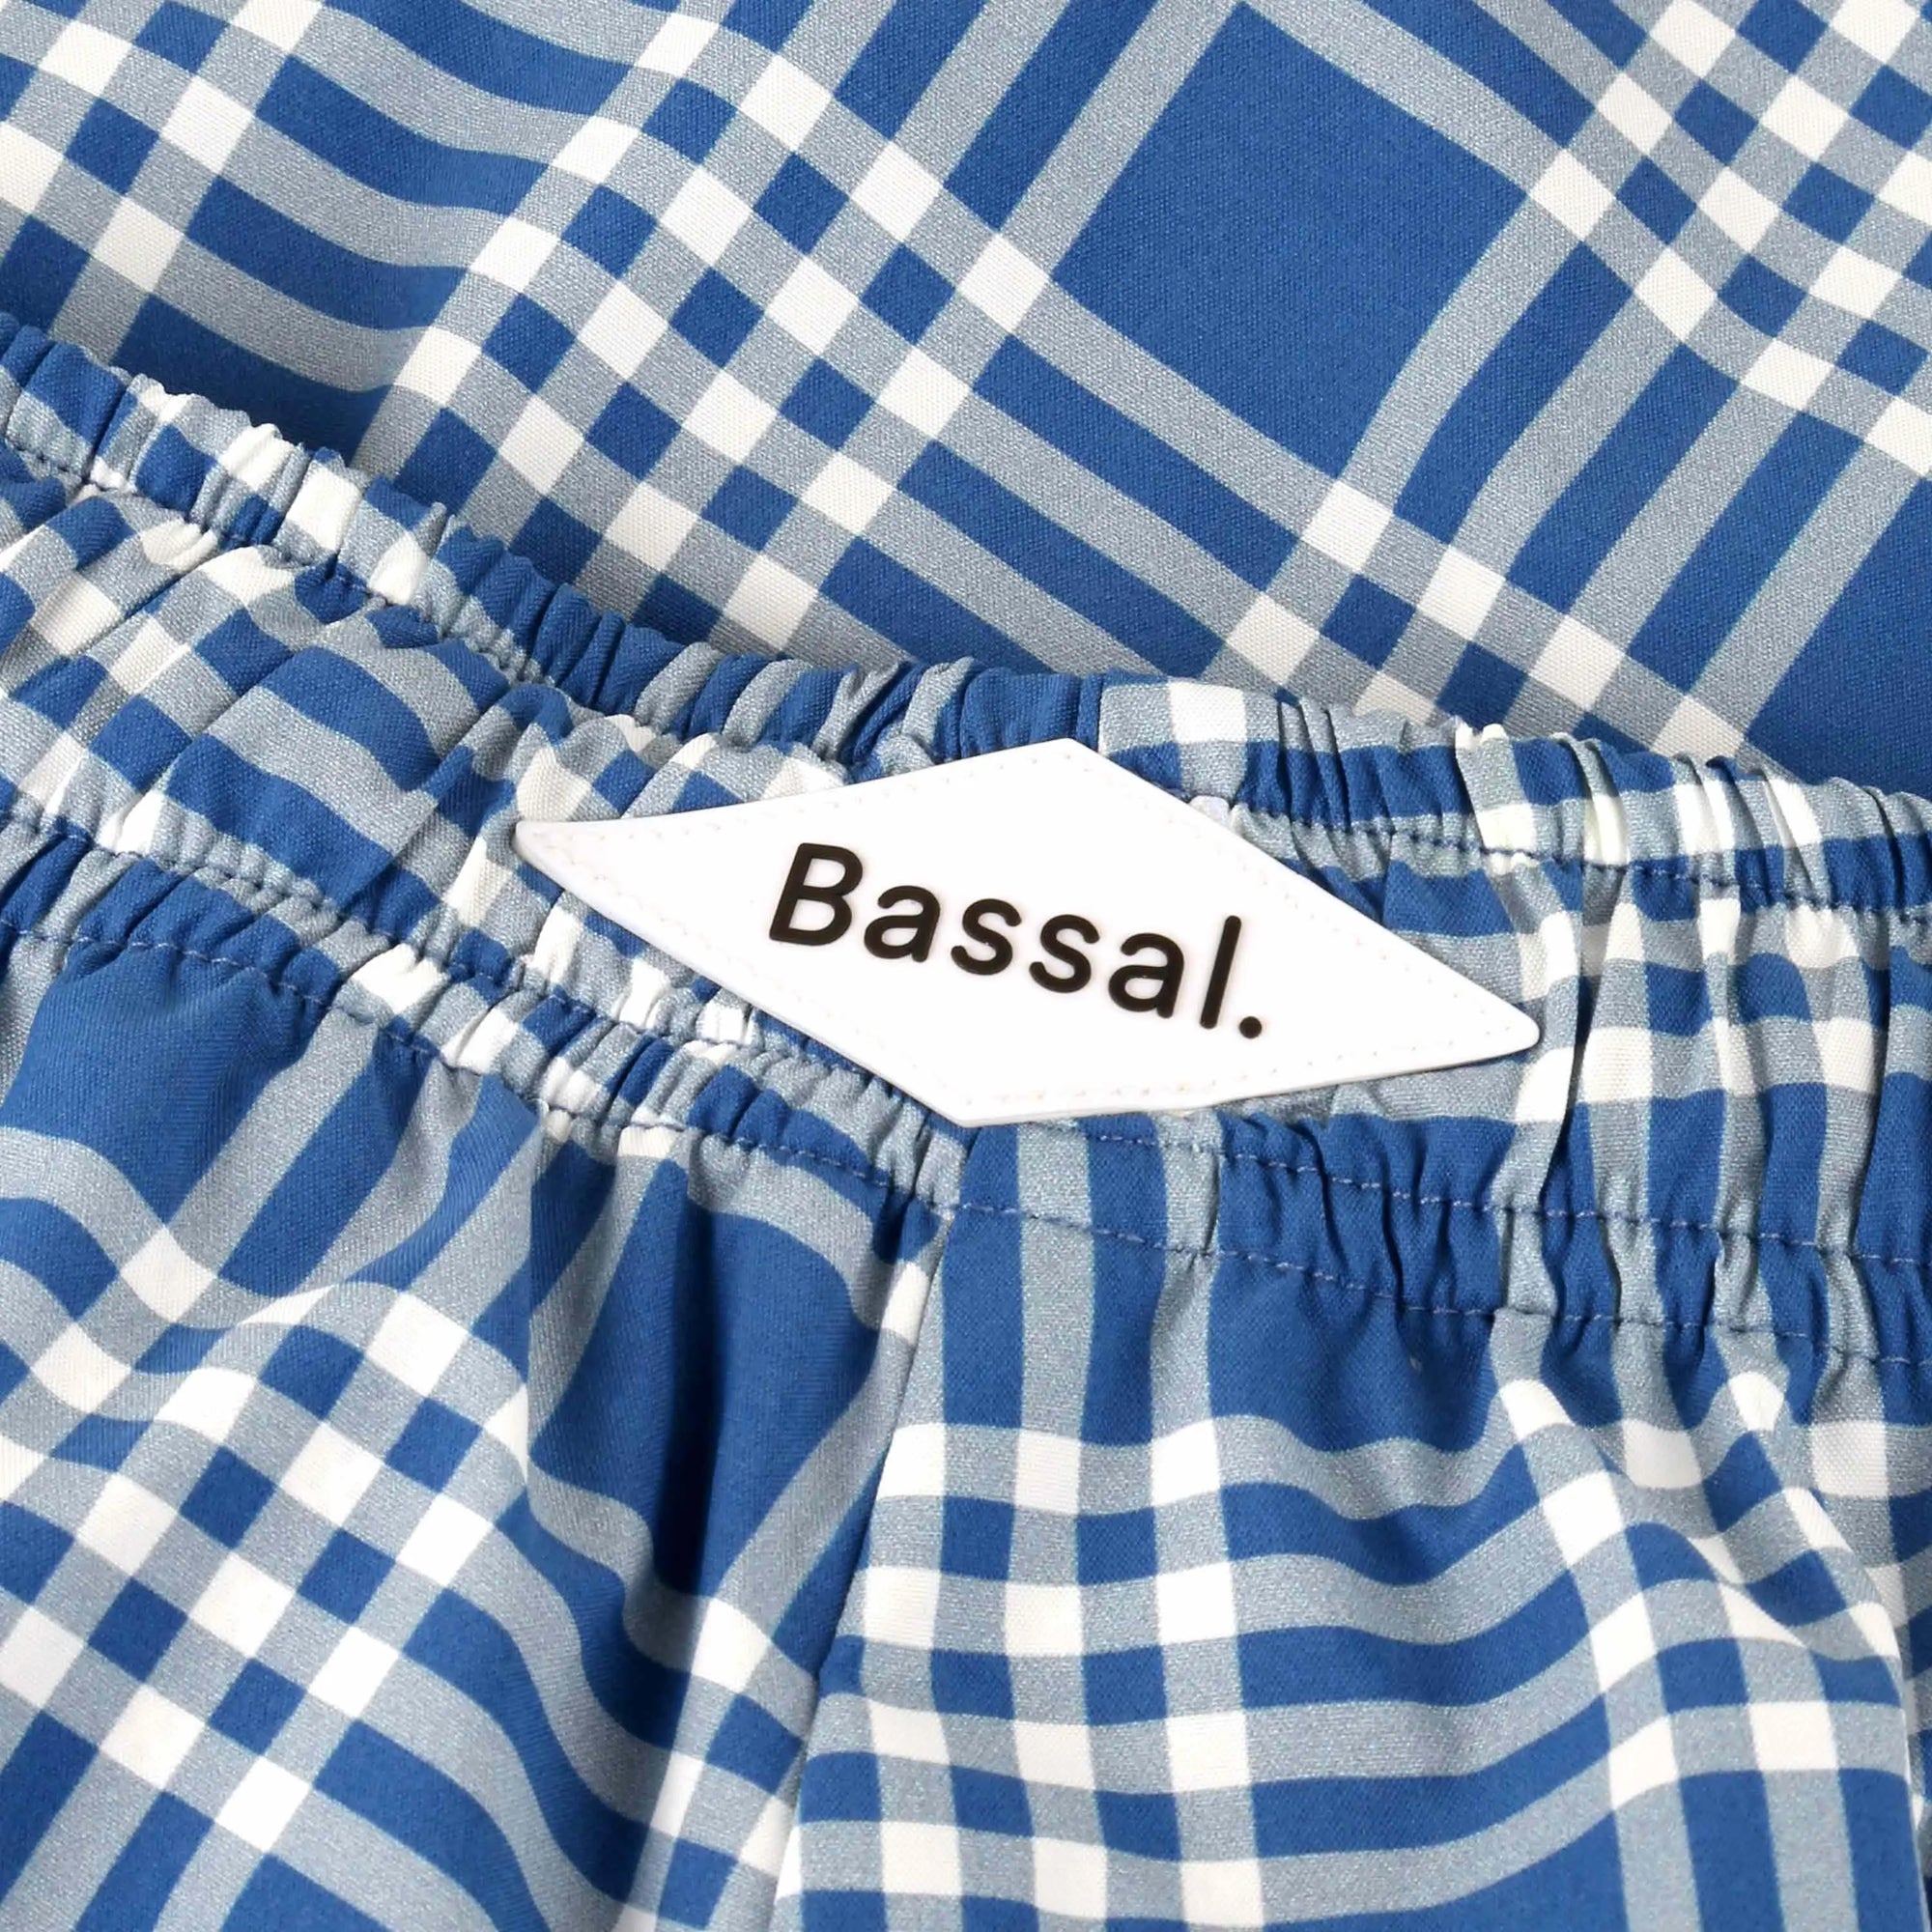 A pair of blue and white plaid Cuatro Swimwear with an elastic waistband and navy drawstring is neatly folded inside an open Bassal. box. A clear plastic tag attached to the swimwear reads "Bassal. proudly made for you to wear." Discover them at our flagship store in Barcelona or bassalstore online.